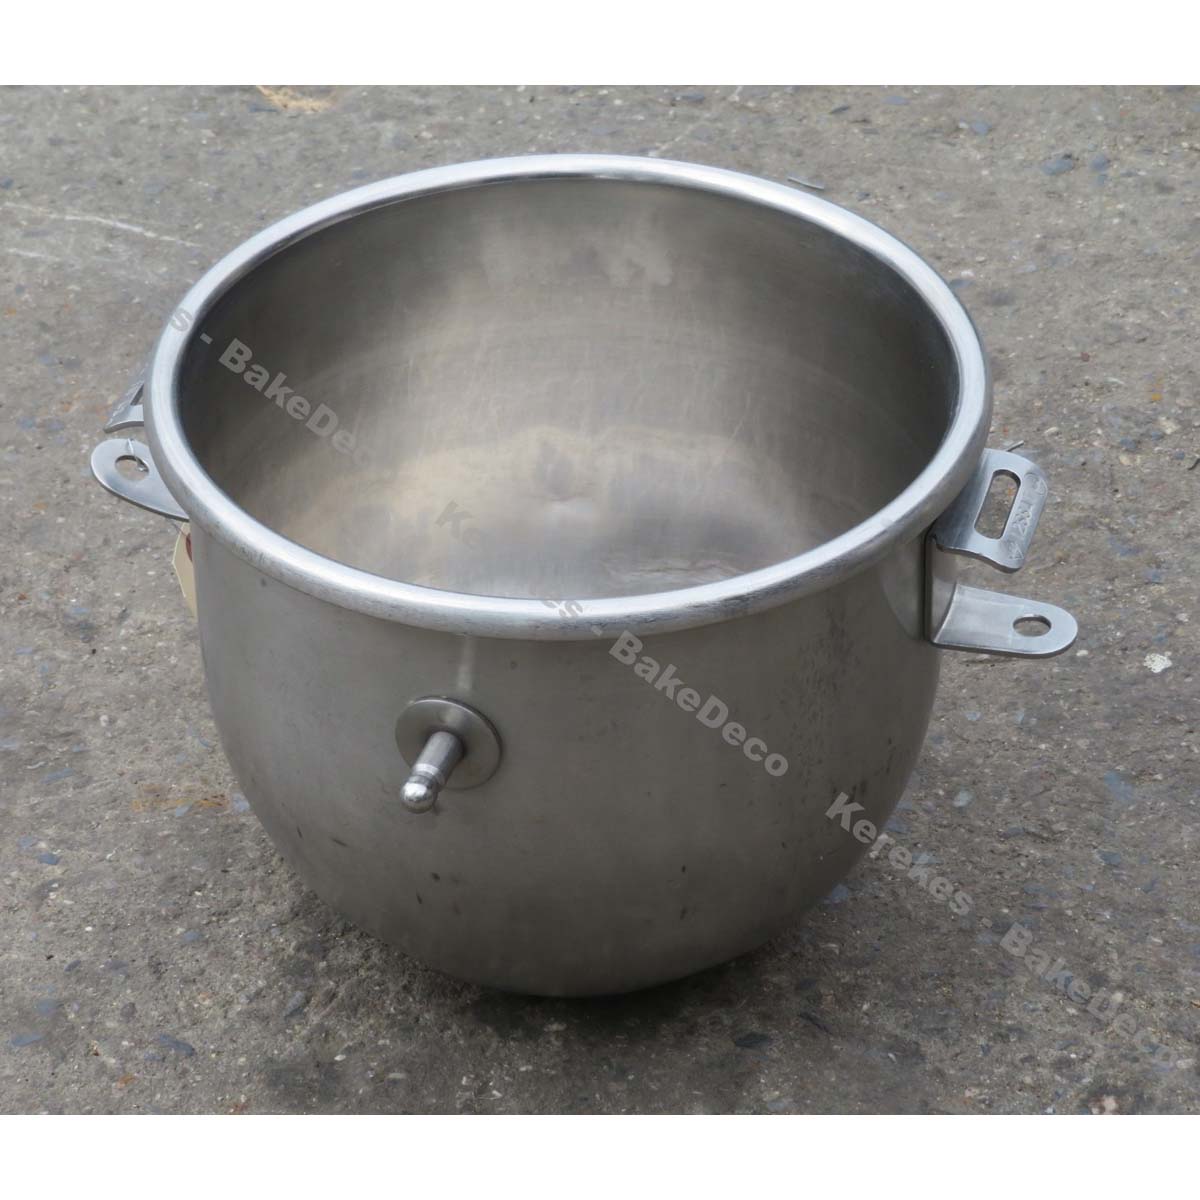 Hobart 00-295644 12 Quart Bowl to Fit A200 Mixer, Used Very Good Condition image 1